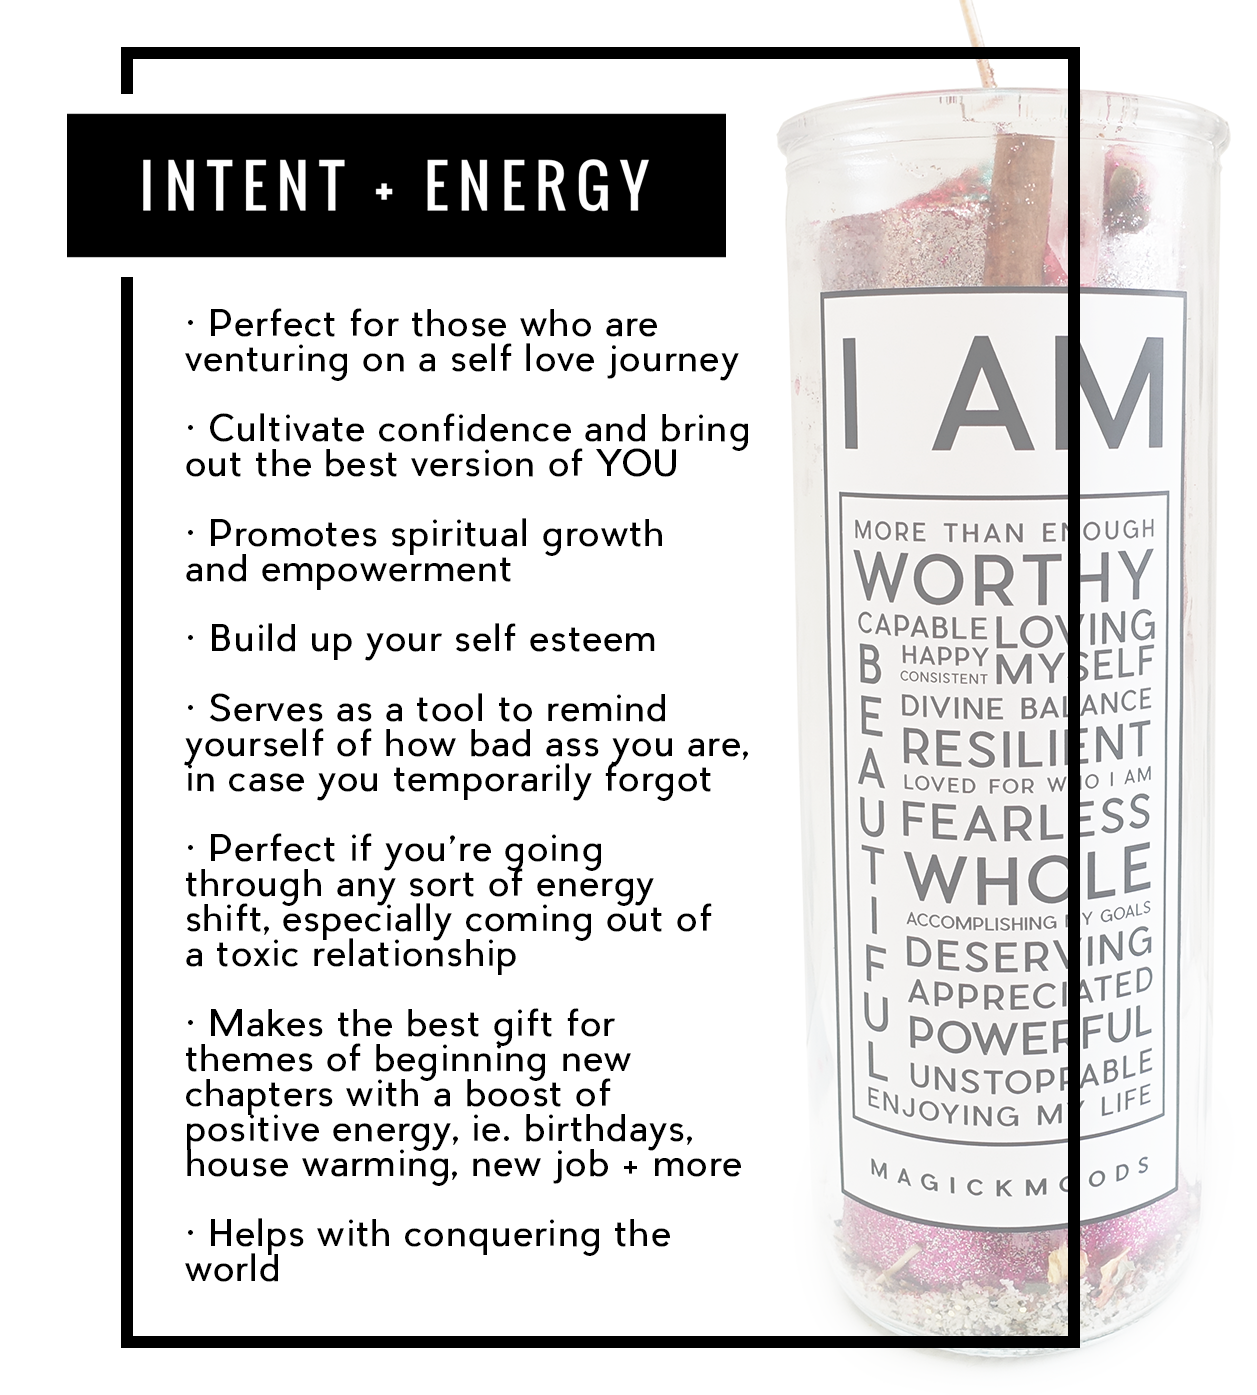 I Am Enough 7-Day Meditation Candle - PREORDER - Ships by Feb 26th, 2024